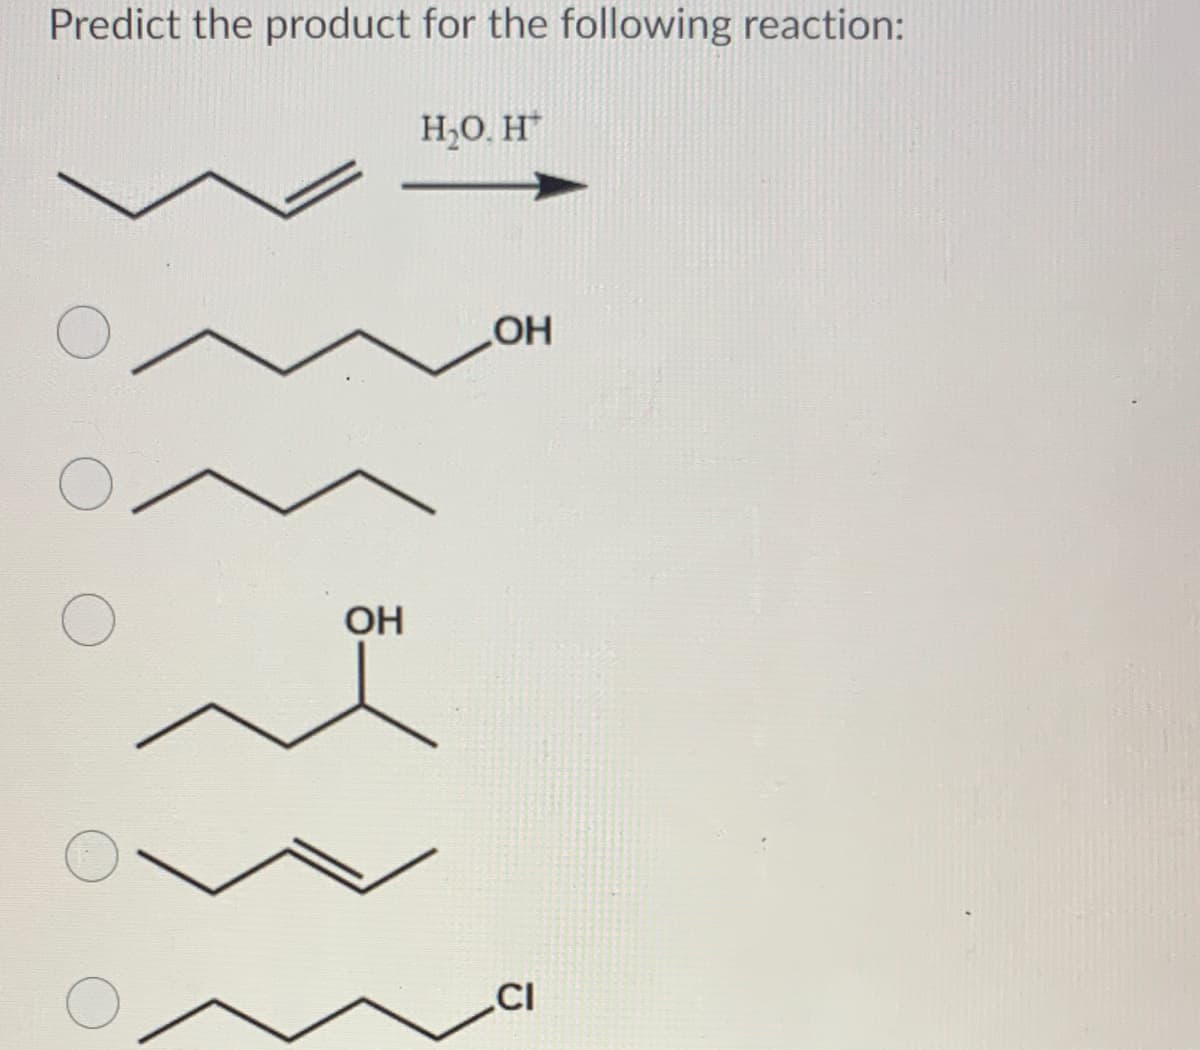 Predict the product for the following reaction:
H,O. H*
